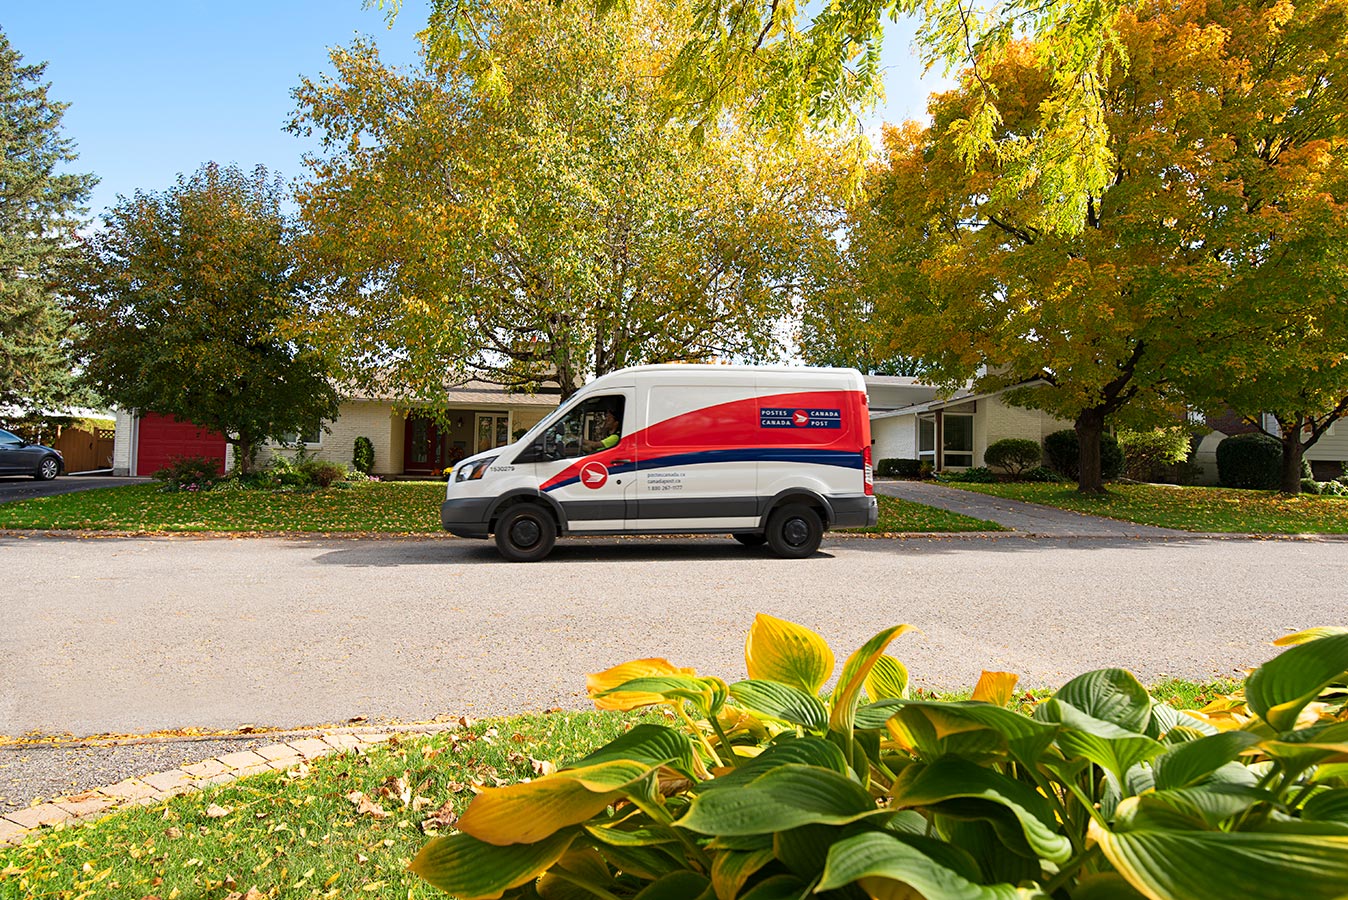 Canada Post delivery truck parked on a residential street